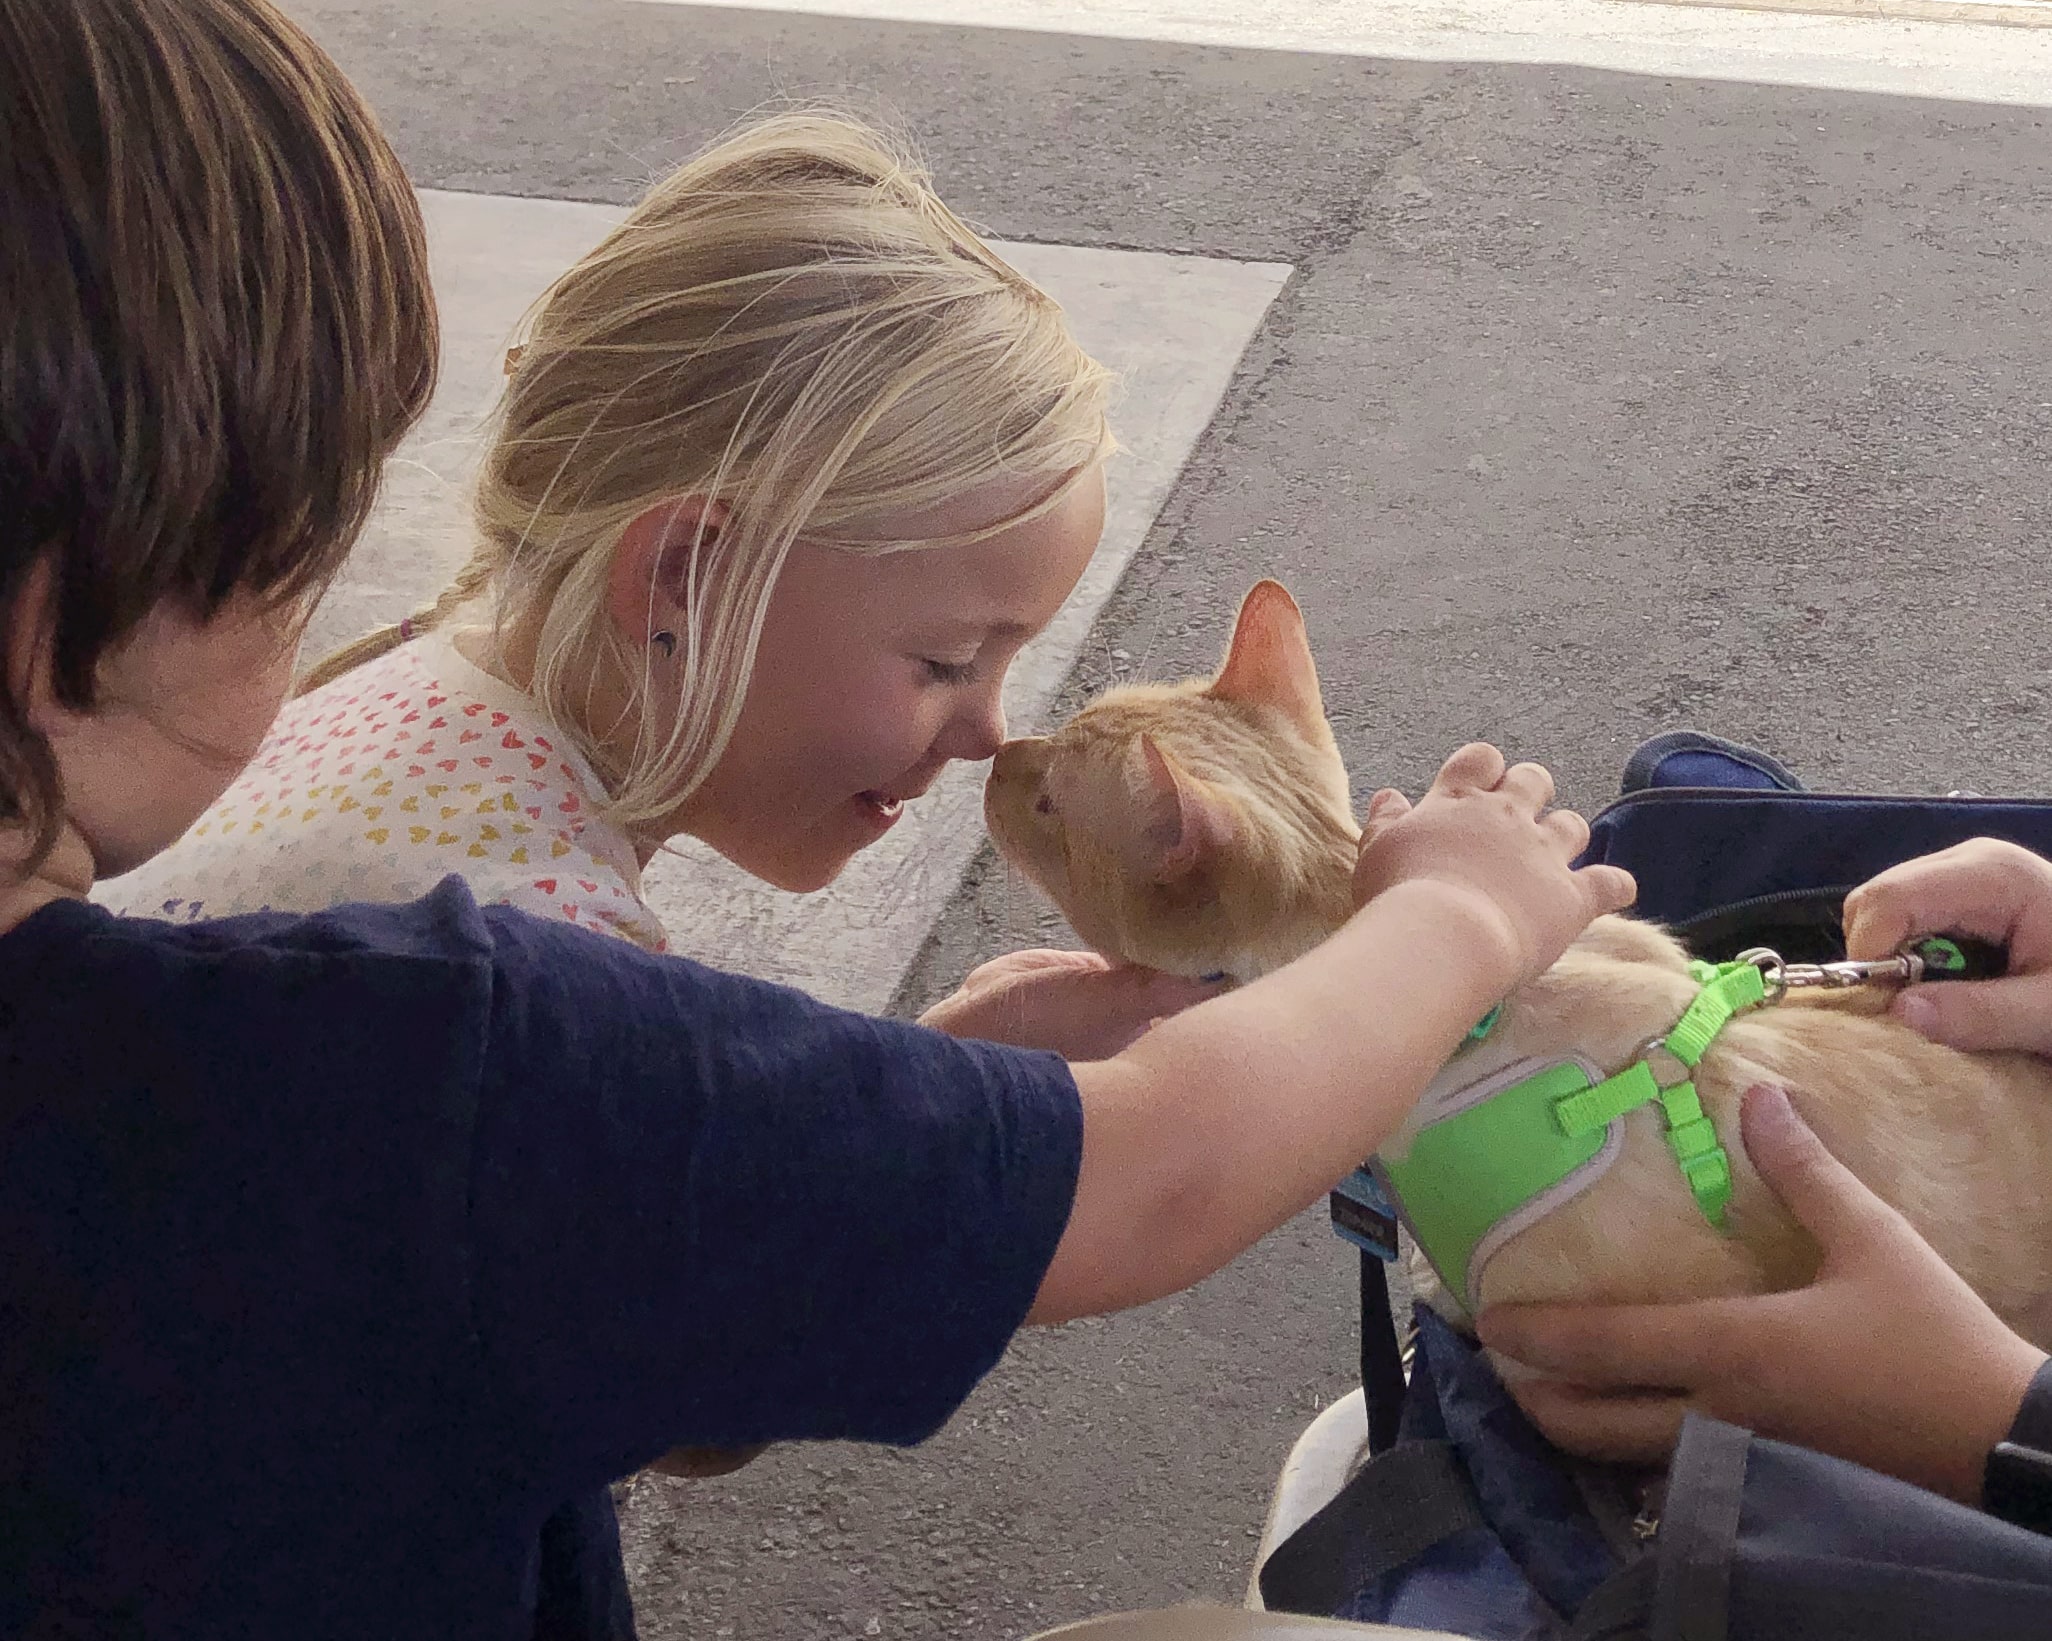 Two young children interacting with an orange tabby